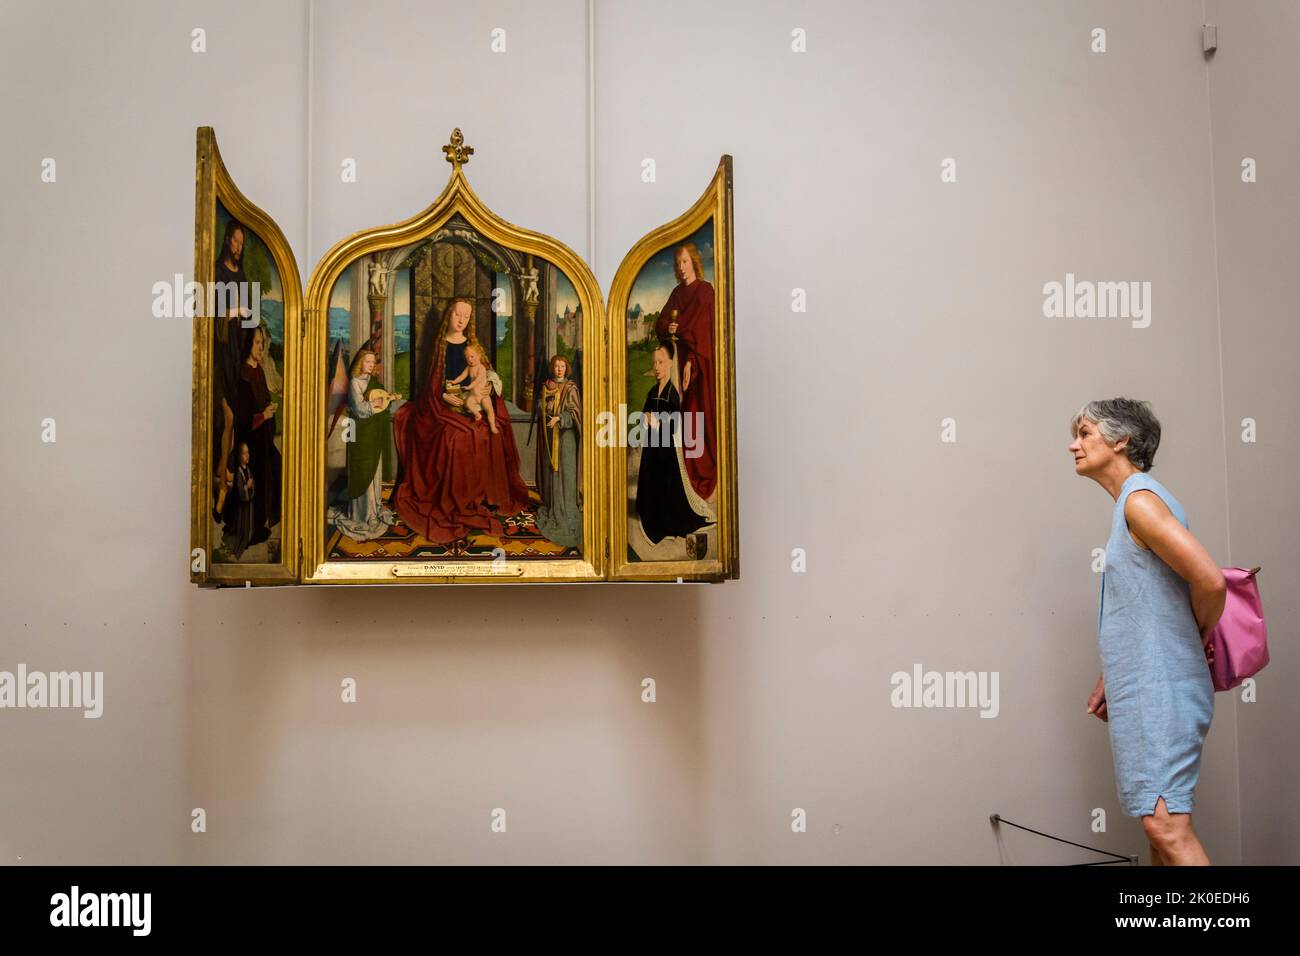 'Annunciation' triptych, 15th century Dutch religious art, Louvre Museum, the world's most-visited museum, and a historic landmark in Paris, France. I Stock Photo